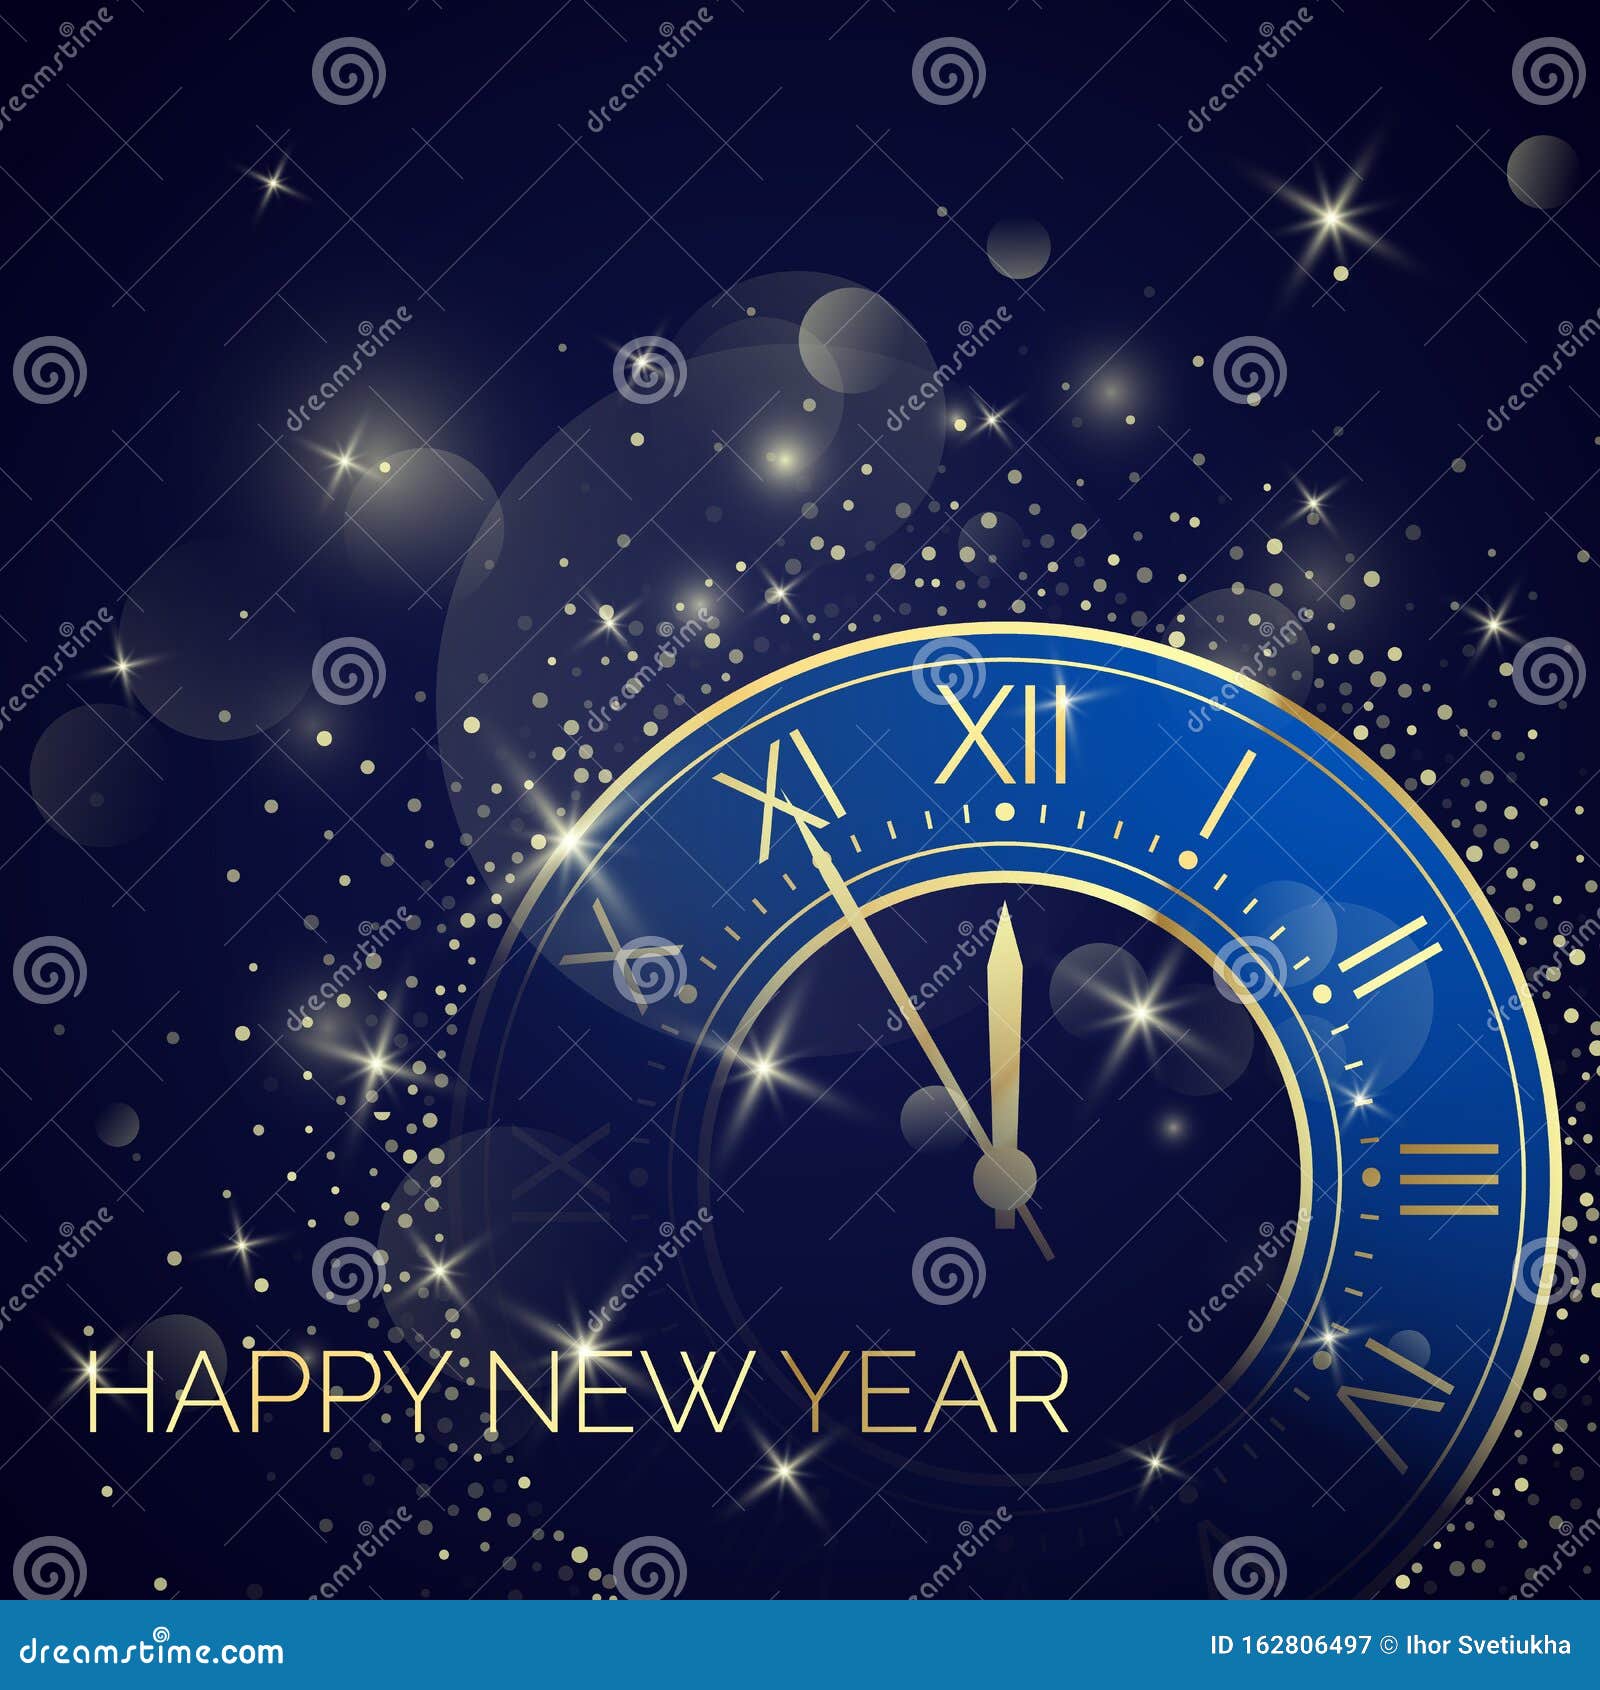 SZZWY 10x5ft Happy New Year 2019 Backdrop Vinyl Vintage Clock Dail Countdown Abstract Shiny Lighting Lines Bokeh Haloes Background New Year Celebration Party Banner Families Child Adult Portrait 